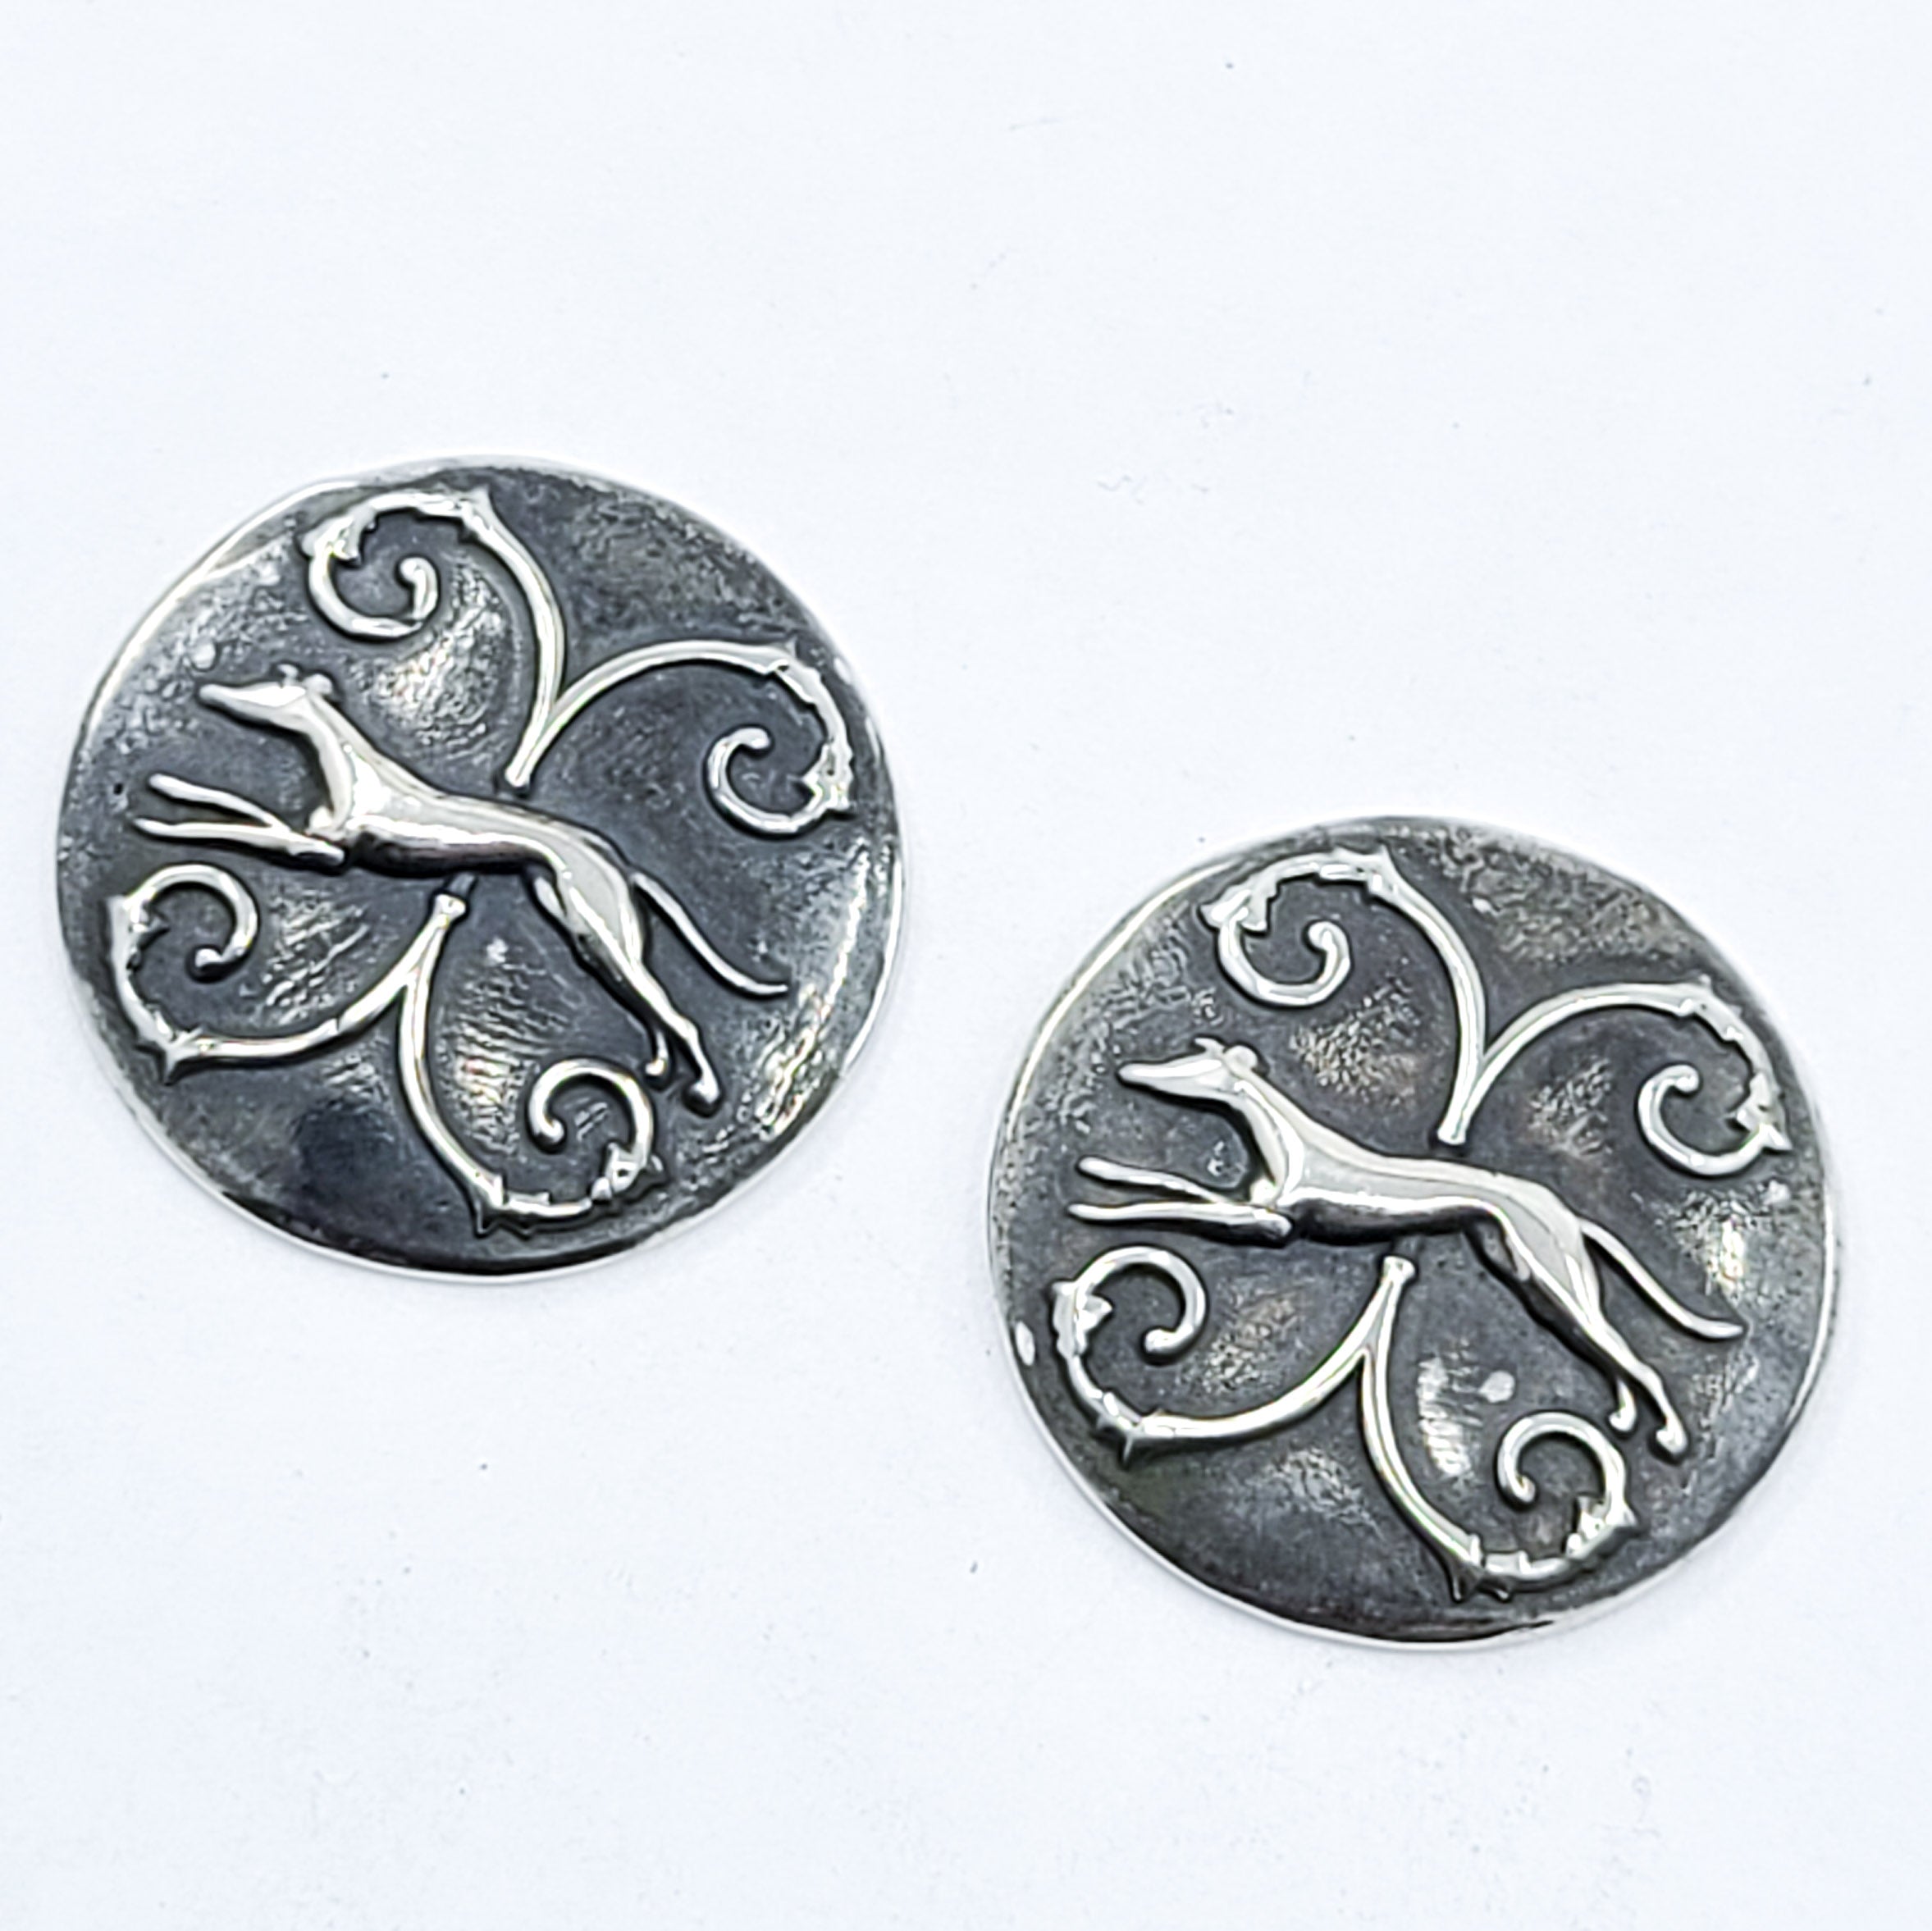 Greyhound Dog Button Earrings